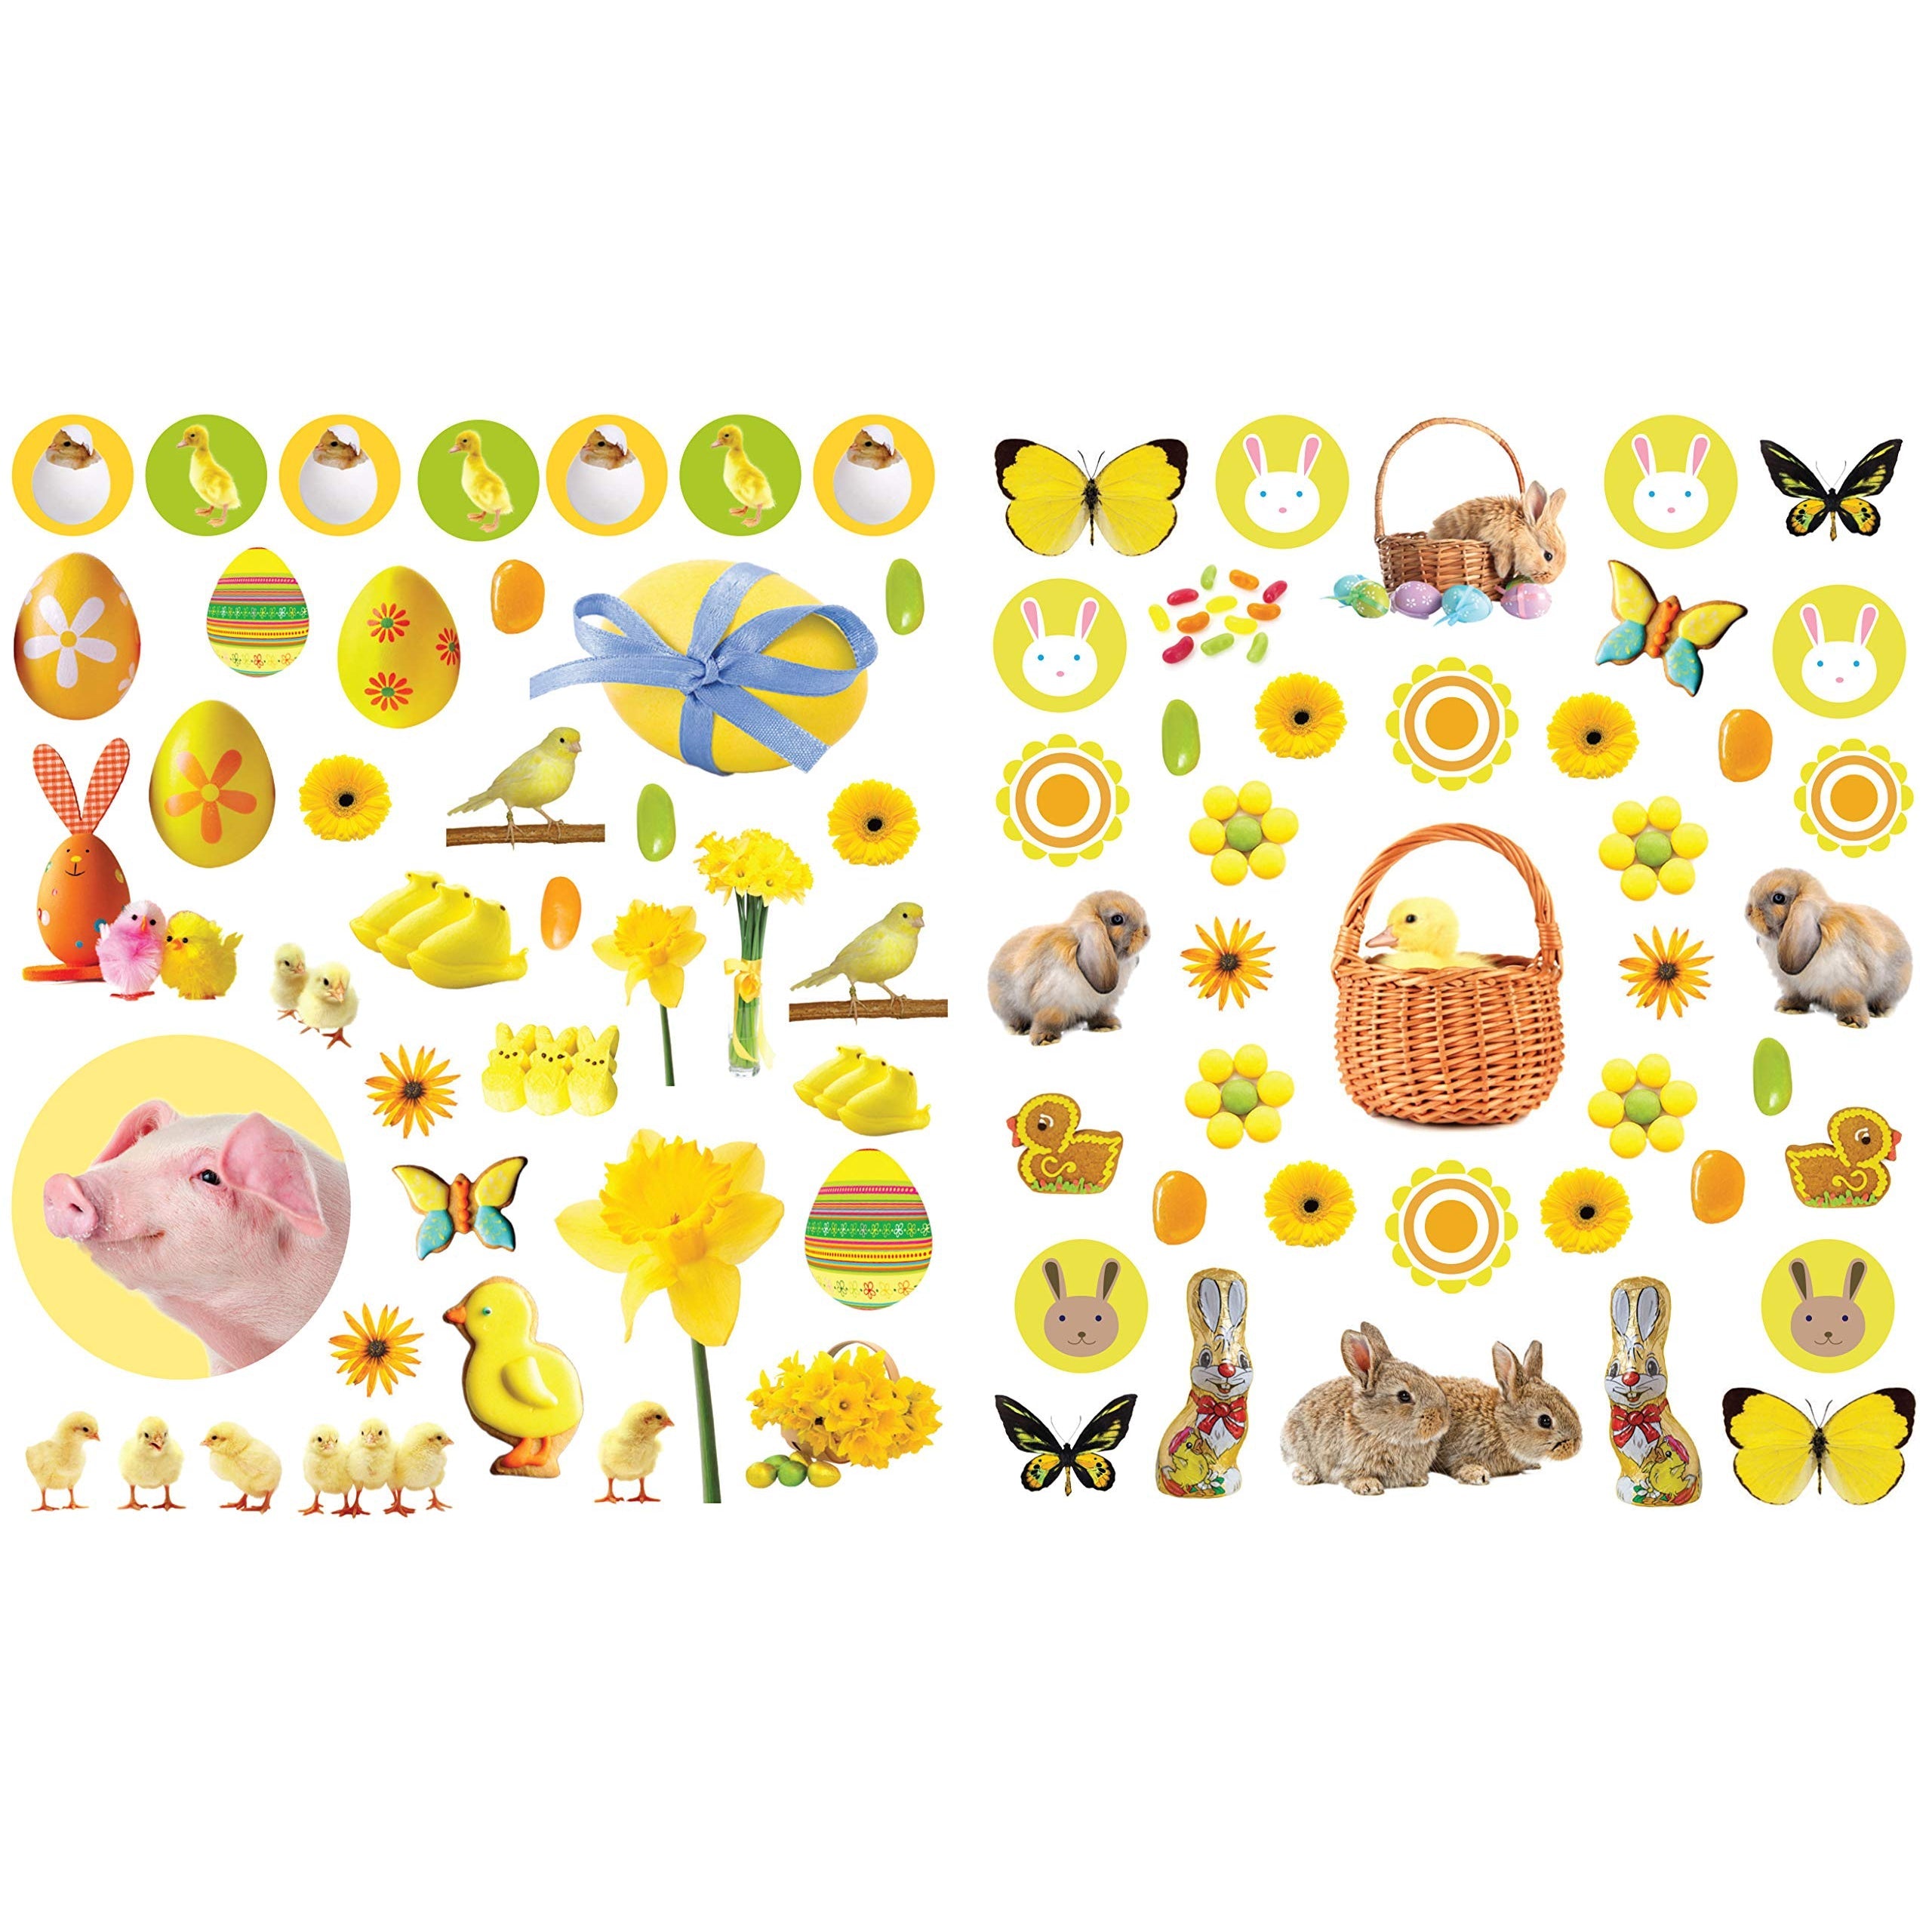 Eyelike Stickers: Easter (Paperback Book)-HACHETTE BOOK GROUP USA-Little Giant Kidz